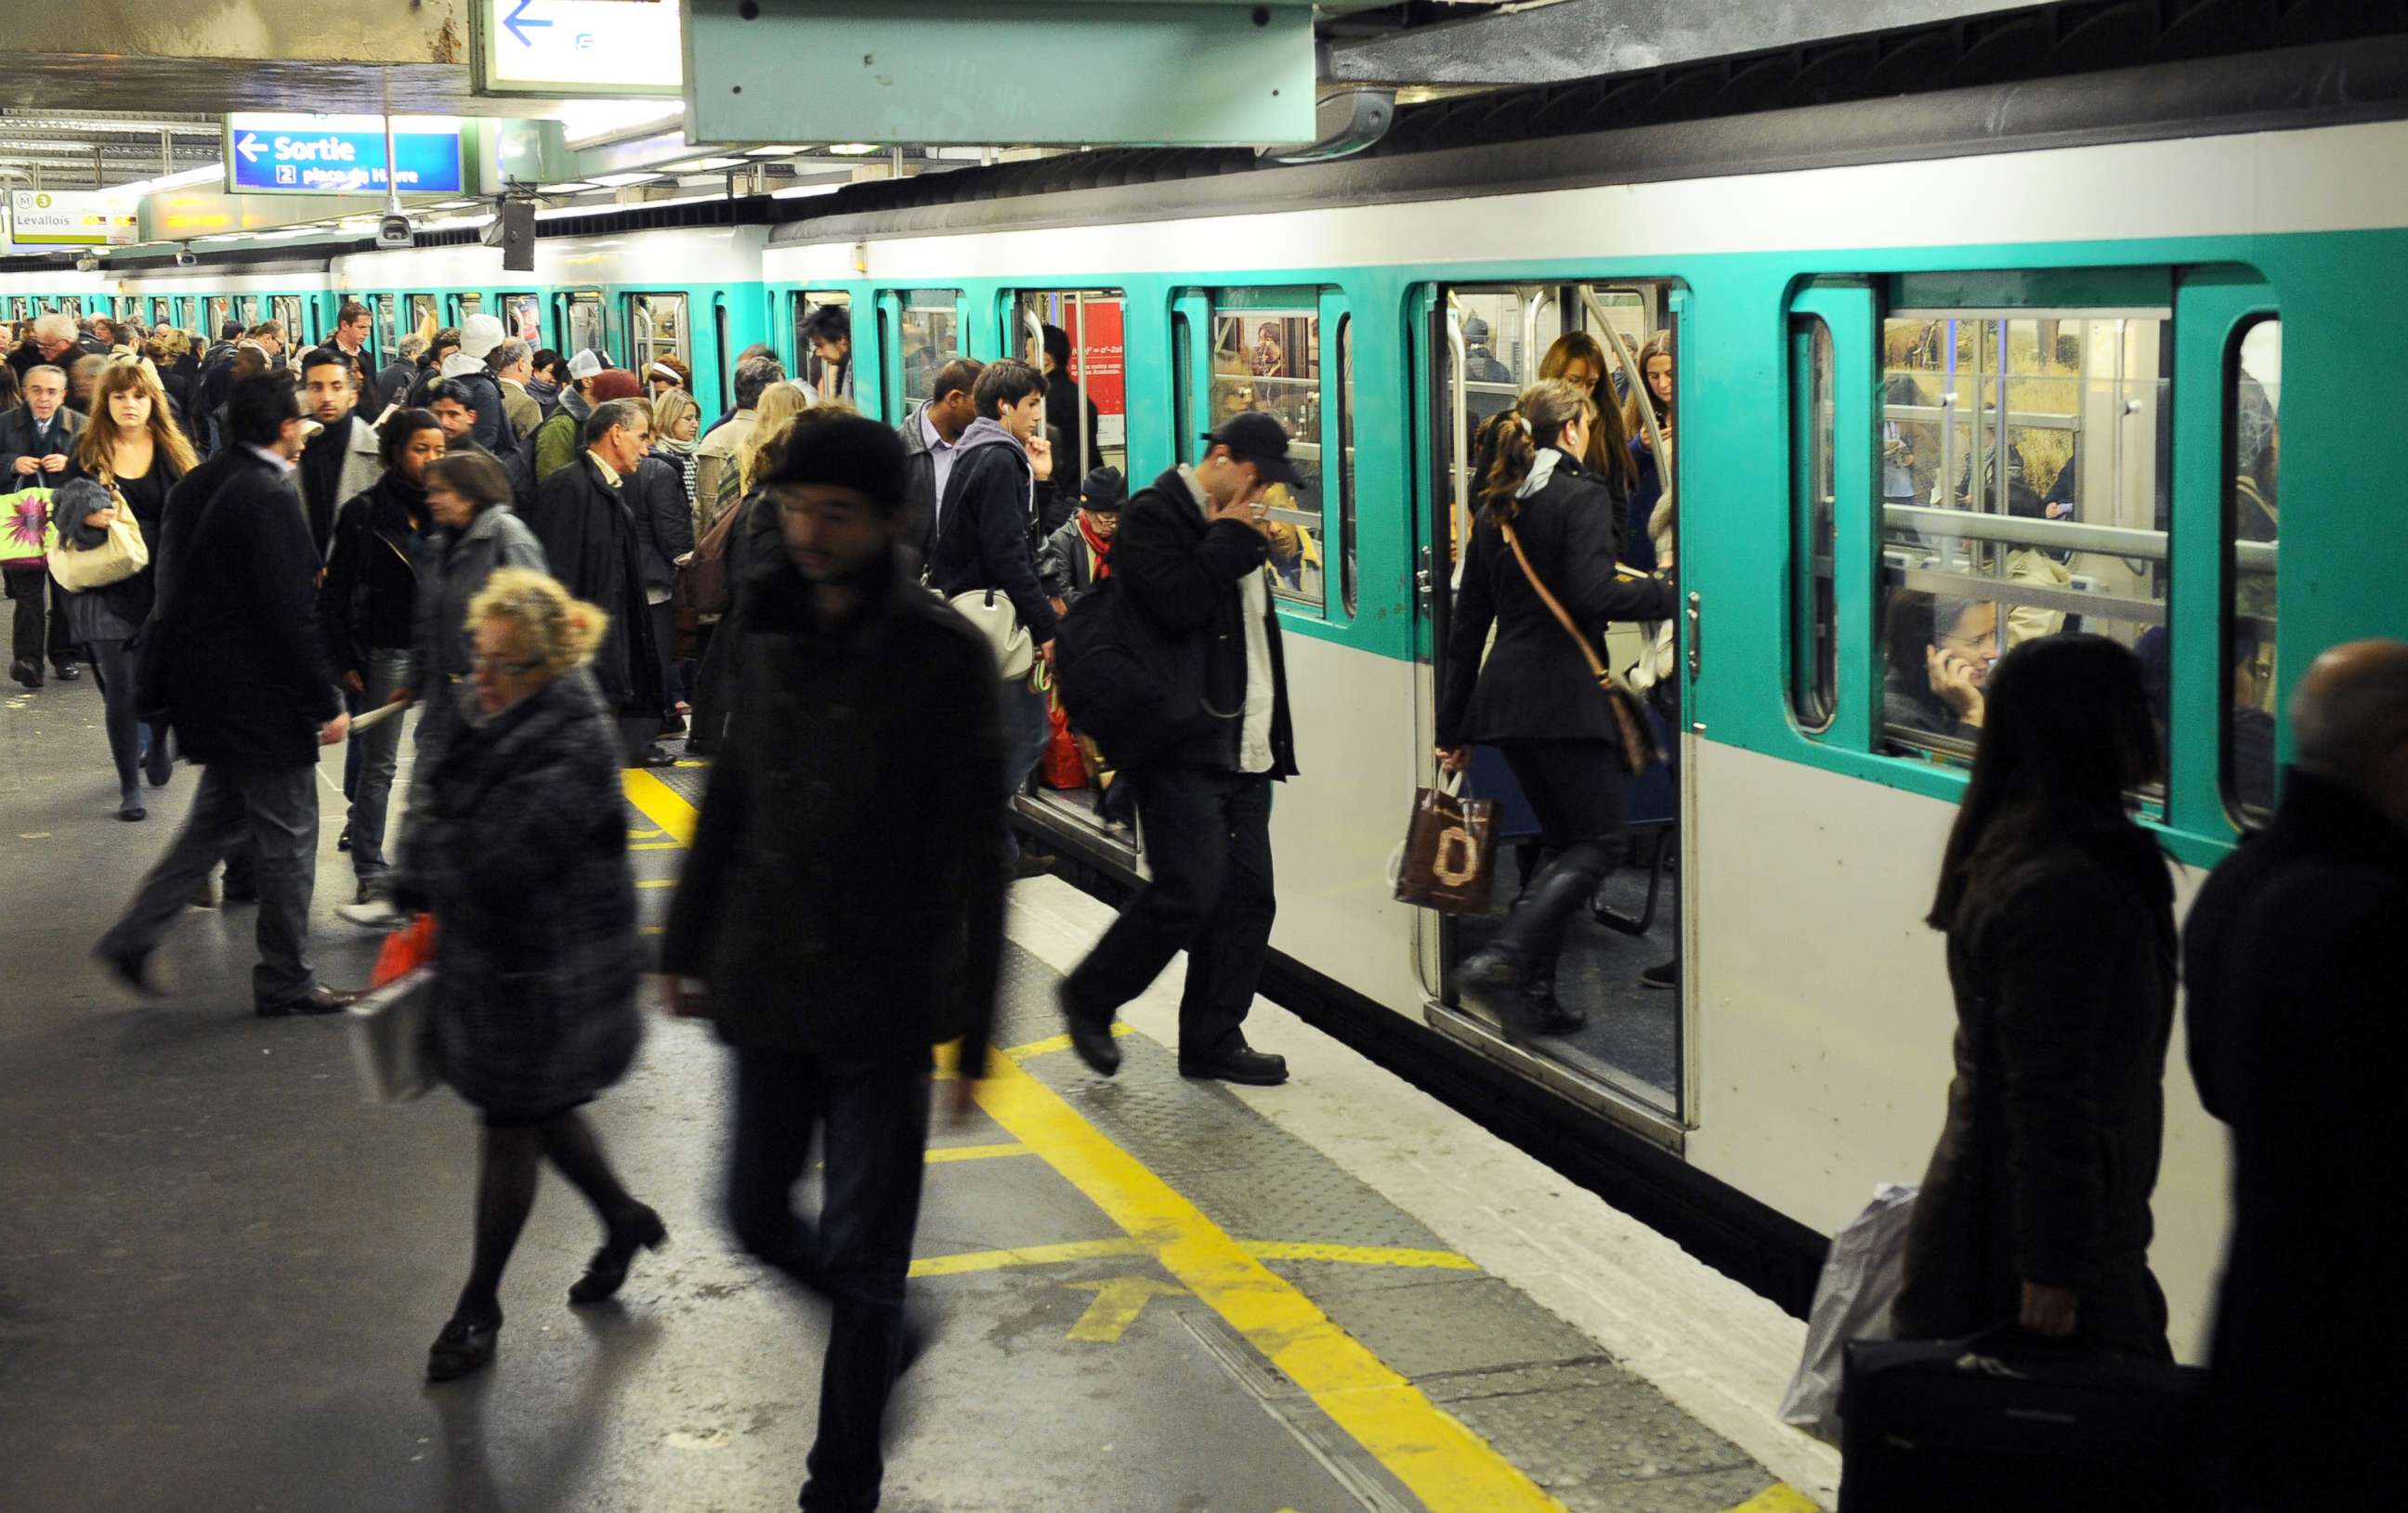 Paris mayor wants free public transport for all to reduce pollution ...